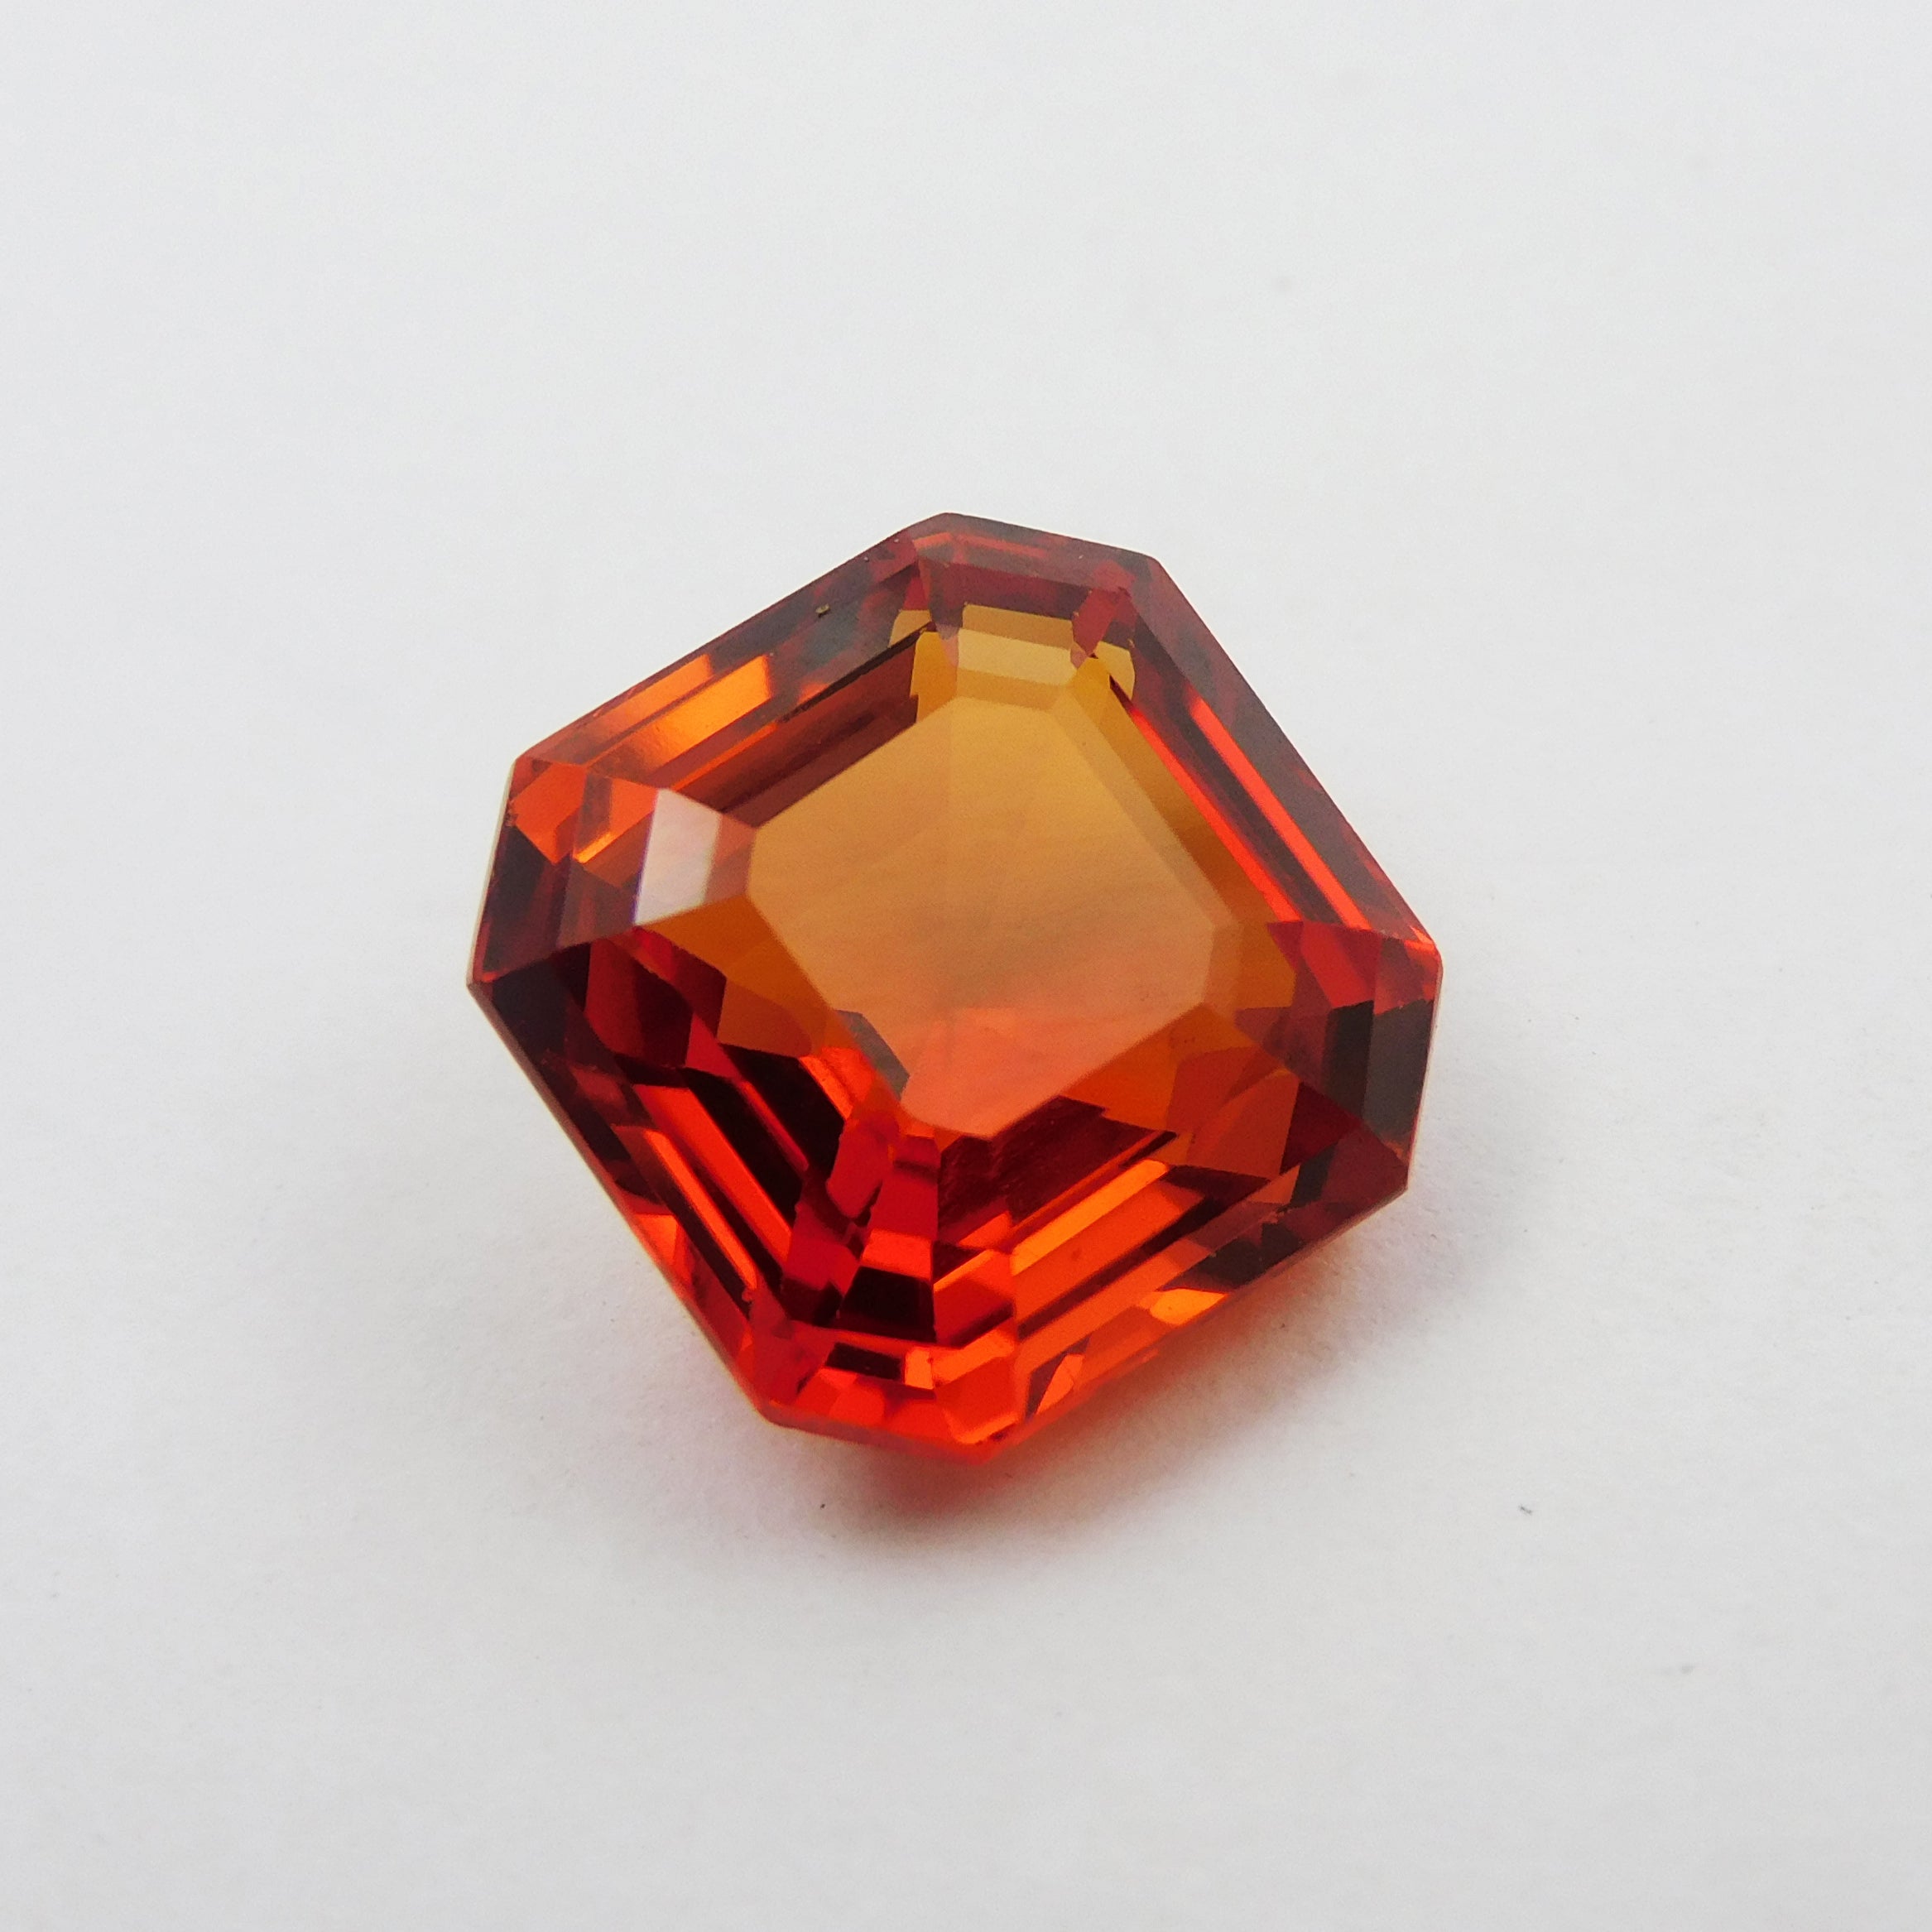 Ring Size Sapphire Gem ! Free Delivery Free Gift ! Certified Square Cut 8.45 Carat Orange Sapphire Natural Loose Gemstone